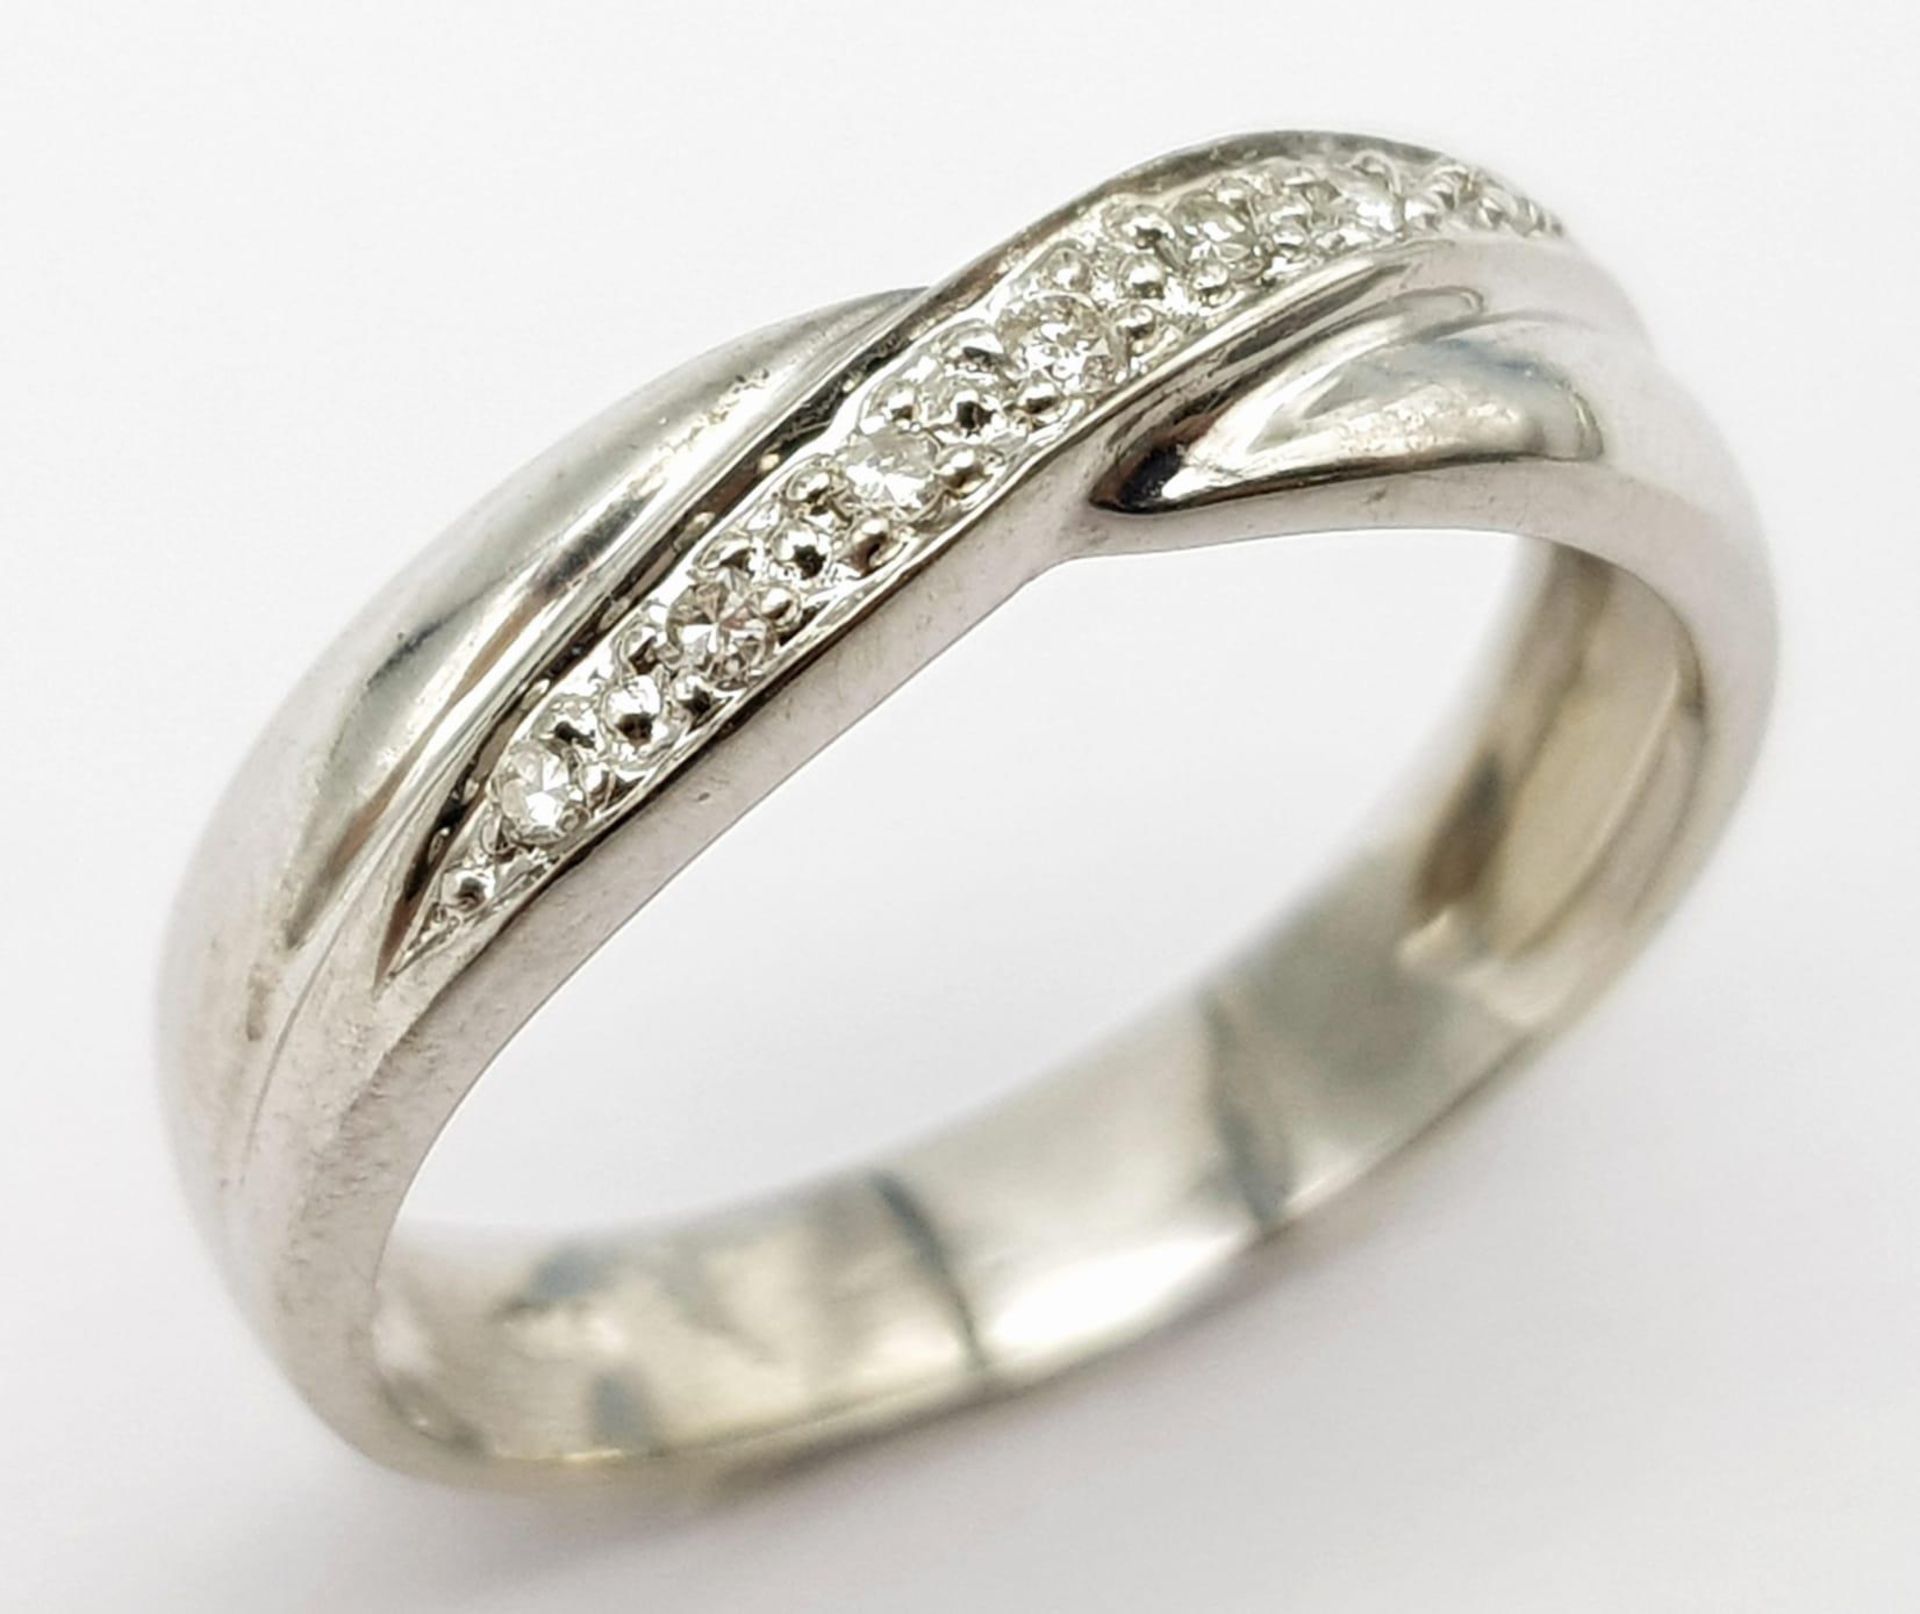 A 9K white Gold (tested) Diamond Twist Ring. 0.05ct diamond. Size K. 2.4g total weight.